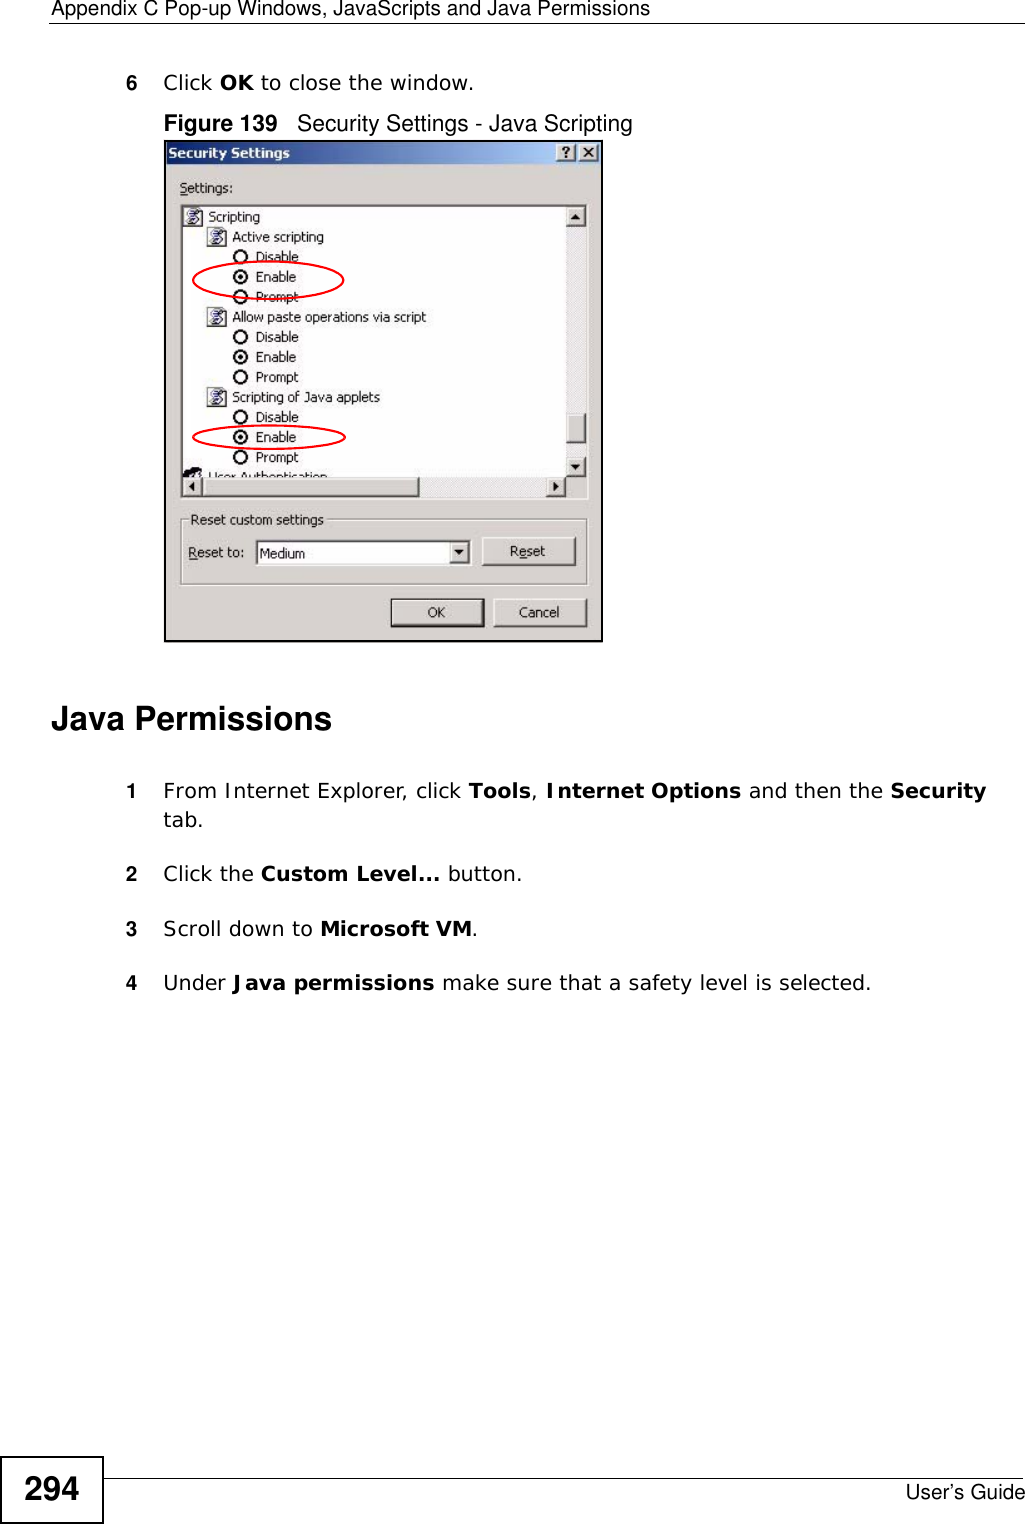 Appendix C Pop-up Windows, JavaScripts and Java PermissionsUser’s Guide2946Click OK to close the window.Figure 139   Security Settings - Java ScriptingJava Permissions1From Internet Explorer, click Tools, Internet Options and then the Security tab. 2Click the Custom Level... button. 3Scroll down to Microsoft VM. 4Under Java permissions make sure that a safety level is selected.